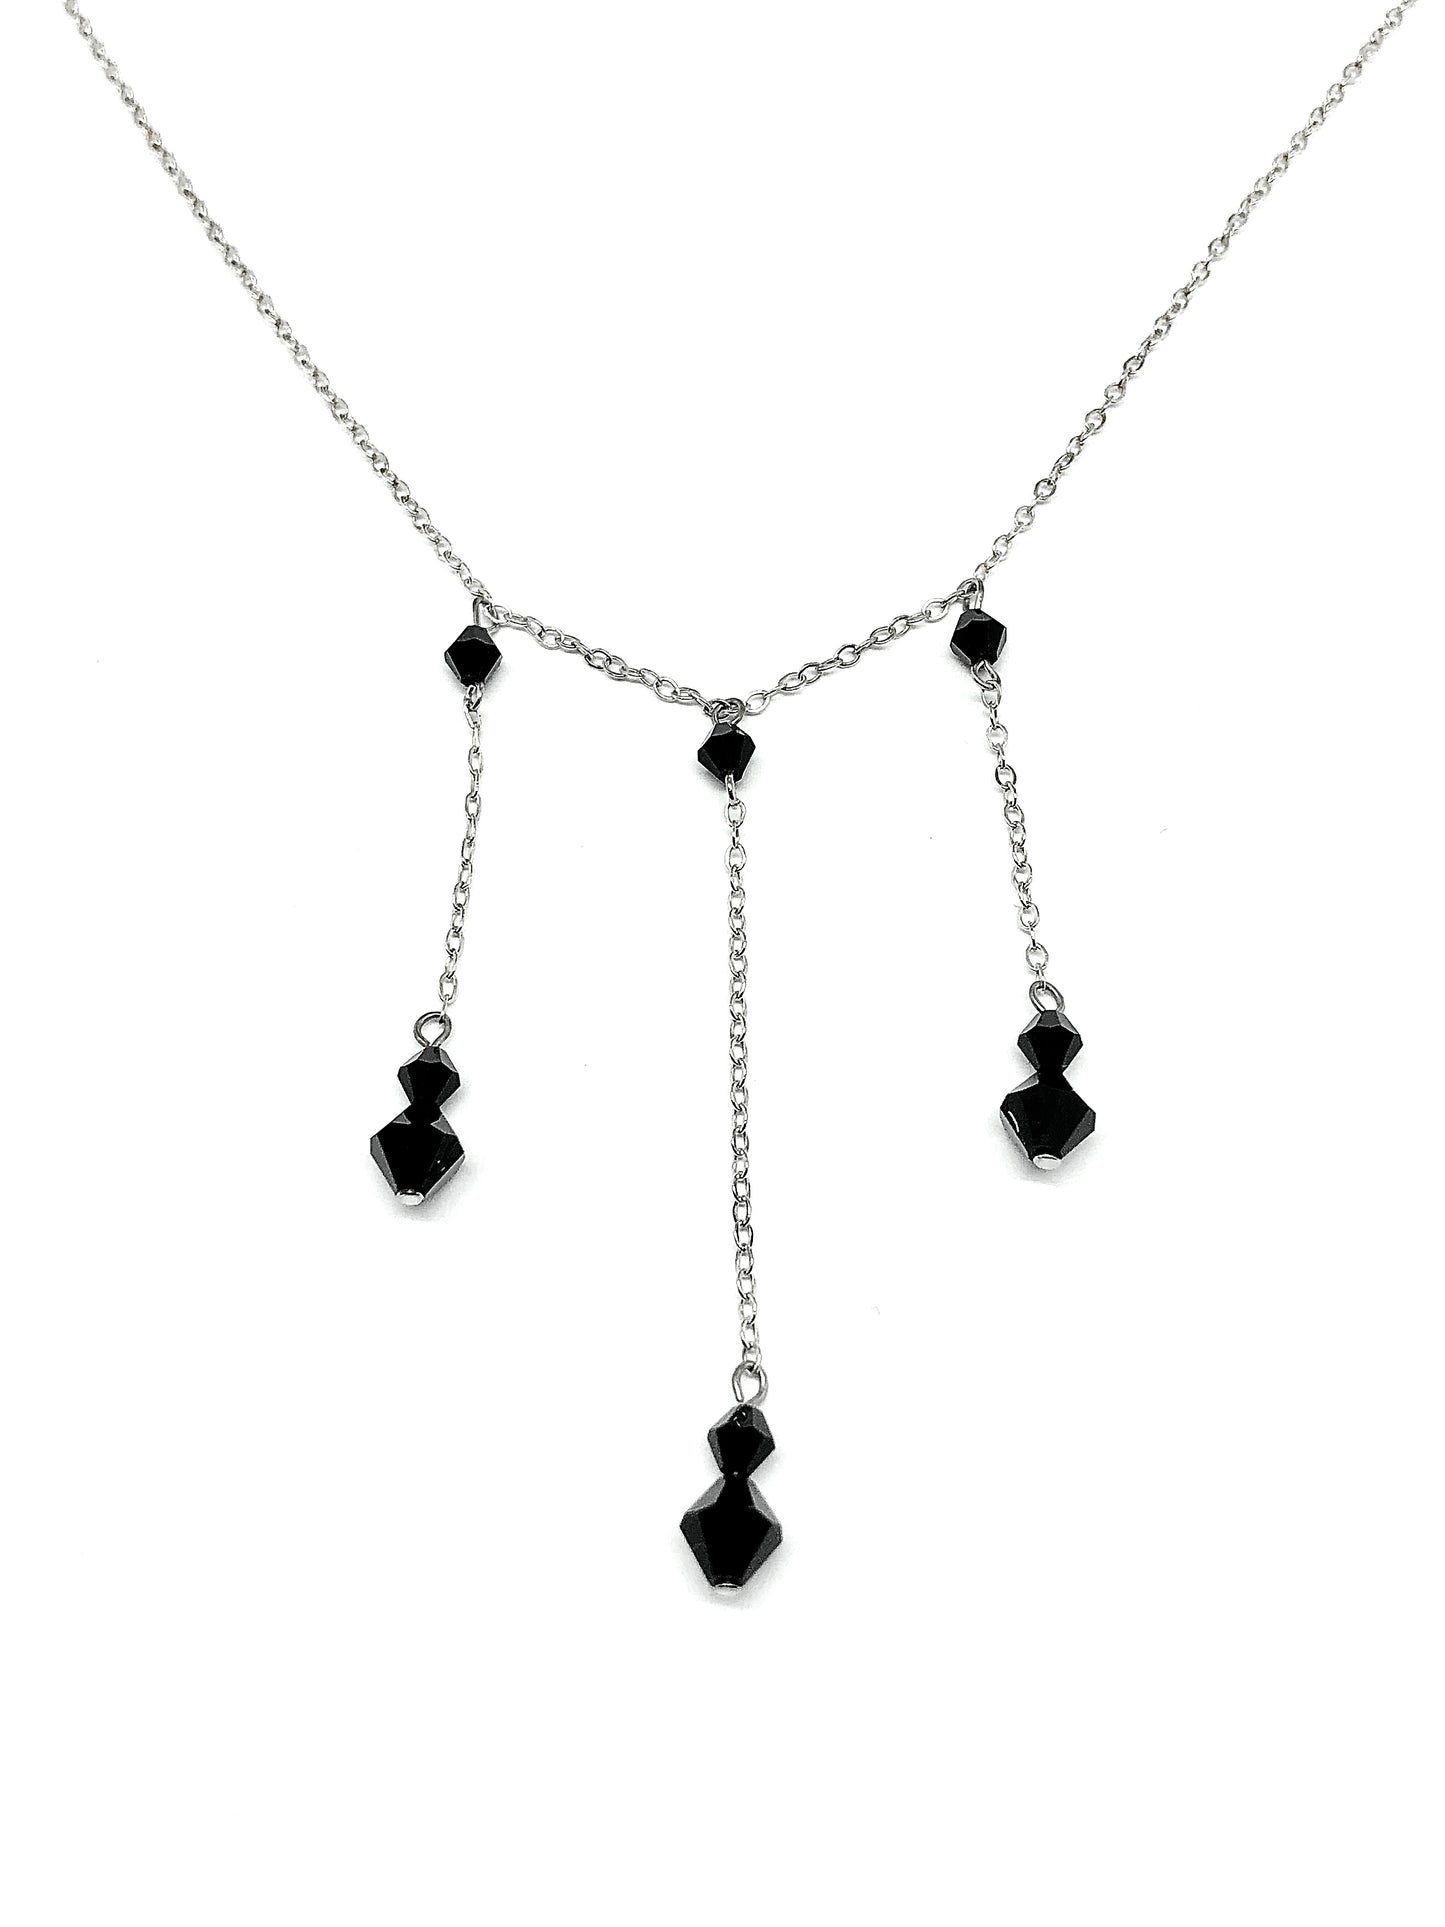 Stylish 16in Sterling Silver Black Bead Station Y Chain Necklace